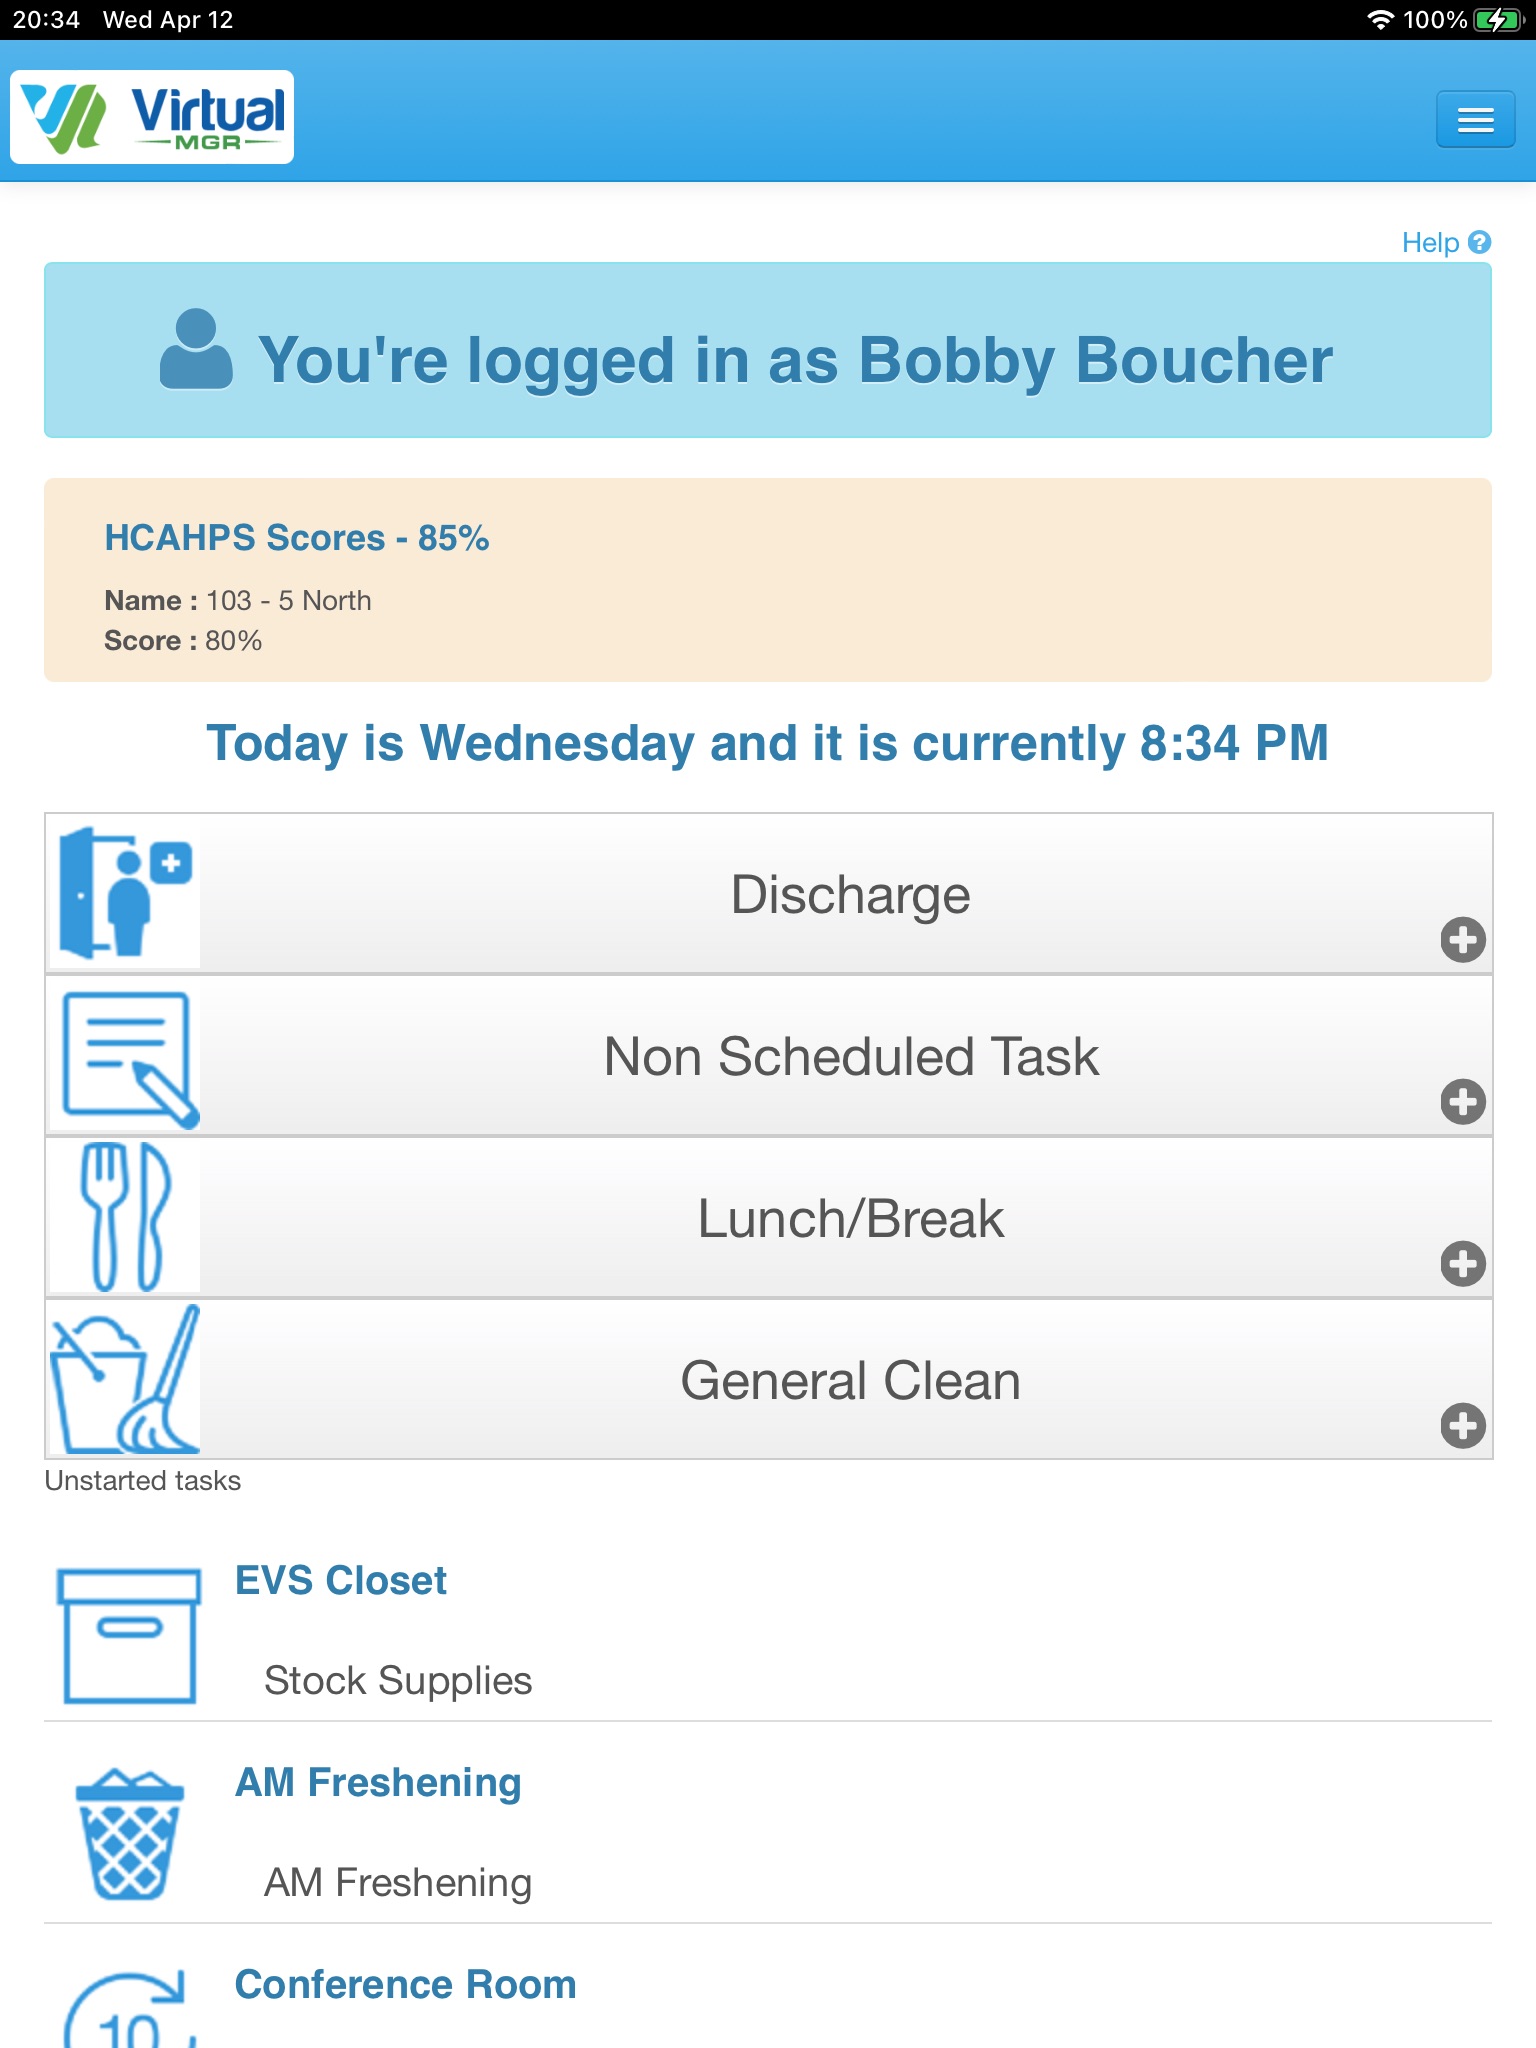 EVS Associate Dashboard which enables Housekeepers to start and finish tasks in addition to managing issues that come up throughout the day, spot tasks assigned by clinical staff, and discharges.